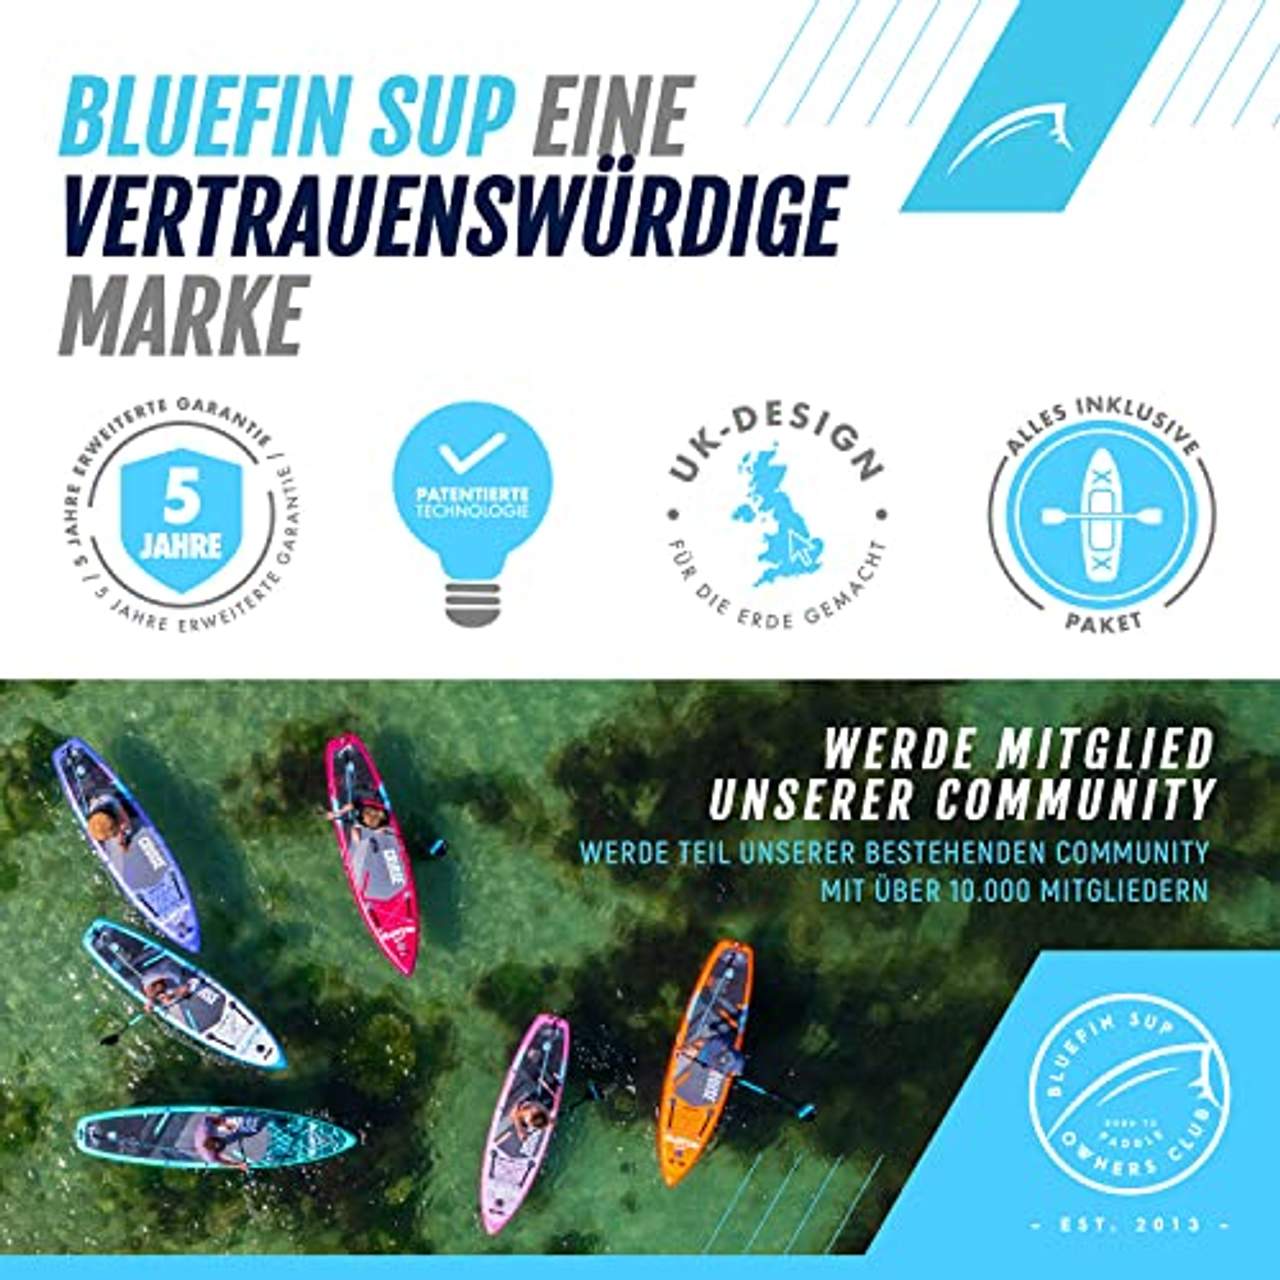 Bluefin SUP Nitro 14' aufpumpbares Stand-up-Paddleboard